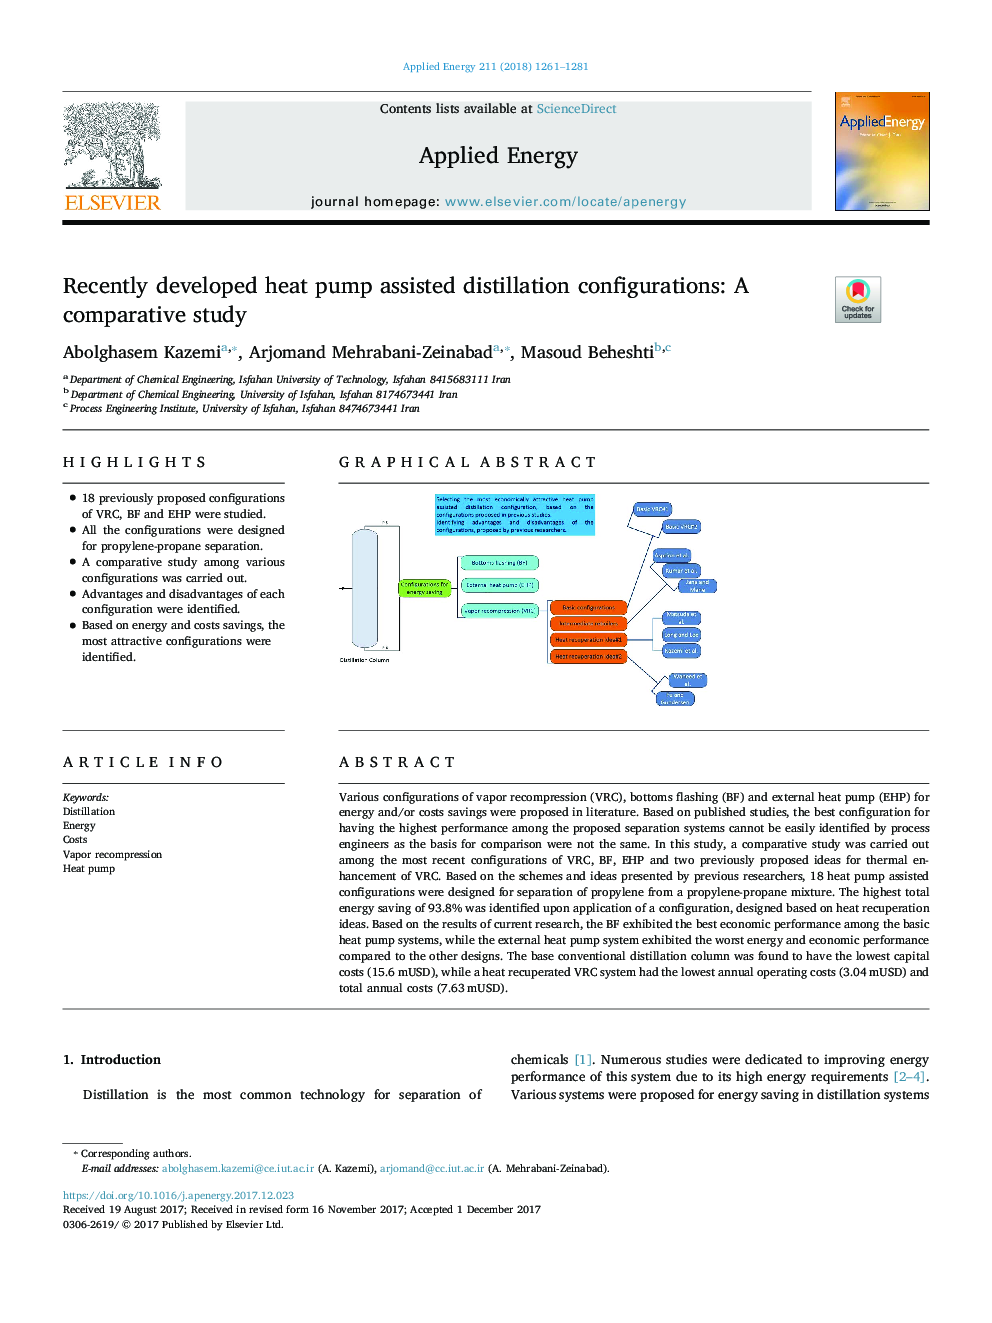 Recently developed heat pump assisted distillation configurations: A comparative study